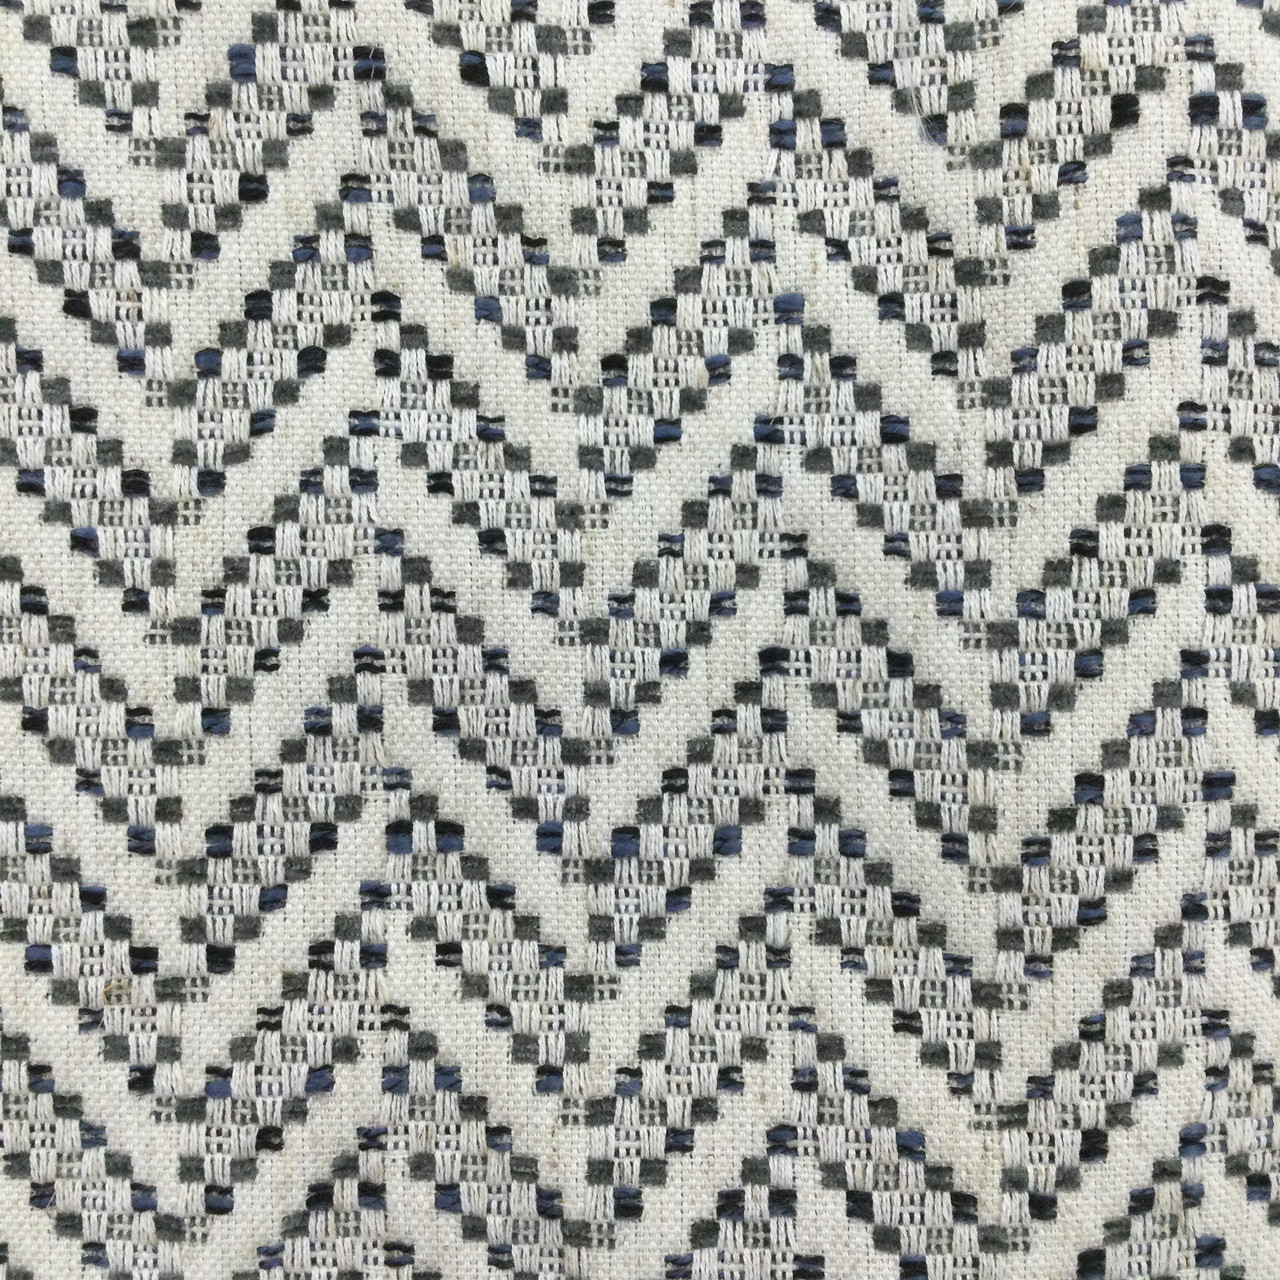 Slate Blue Plain Solid Chenille Upholstery Fabric by The Yard